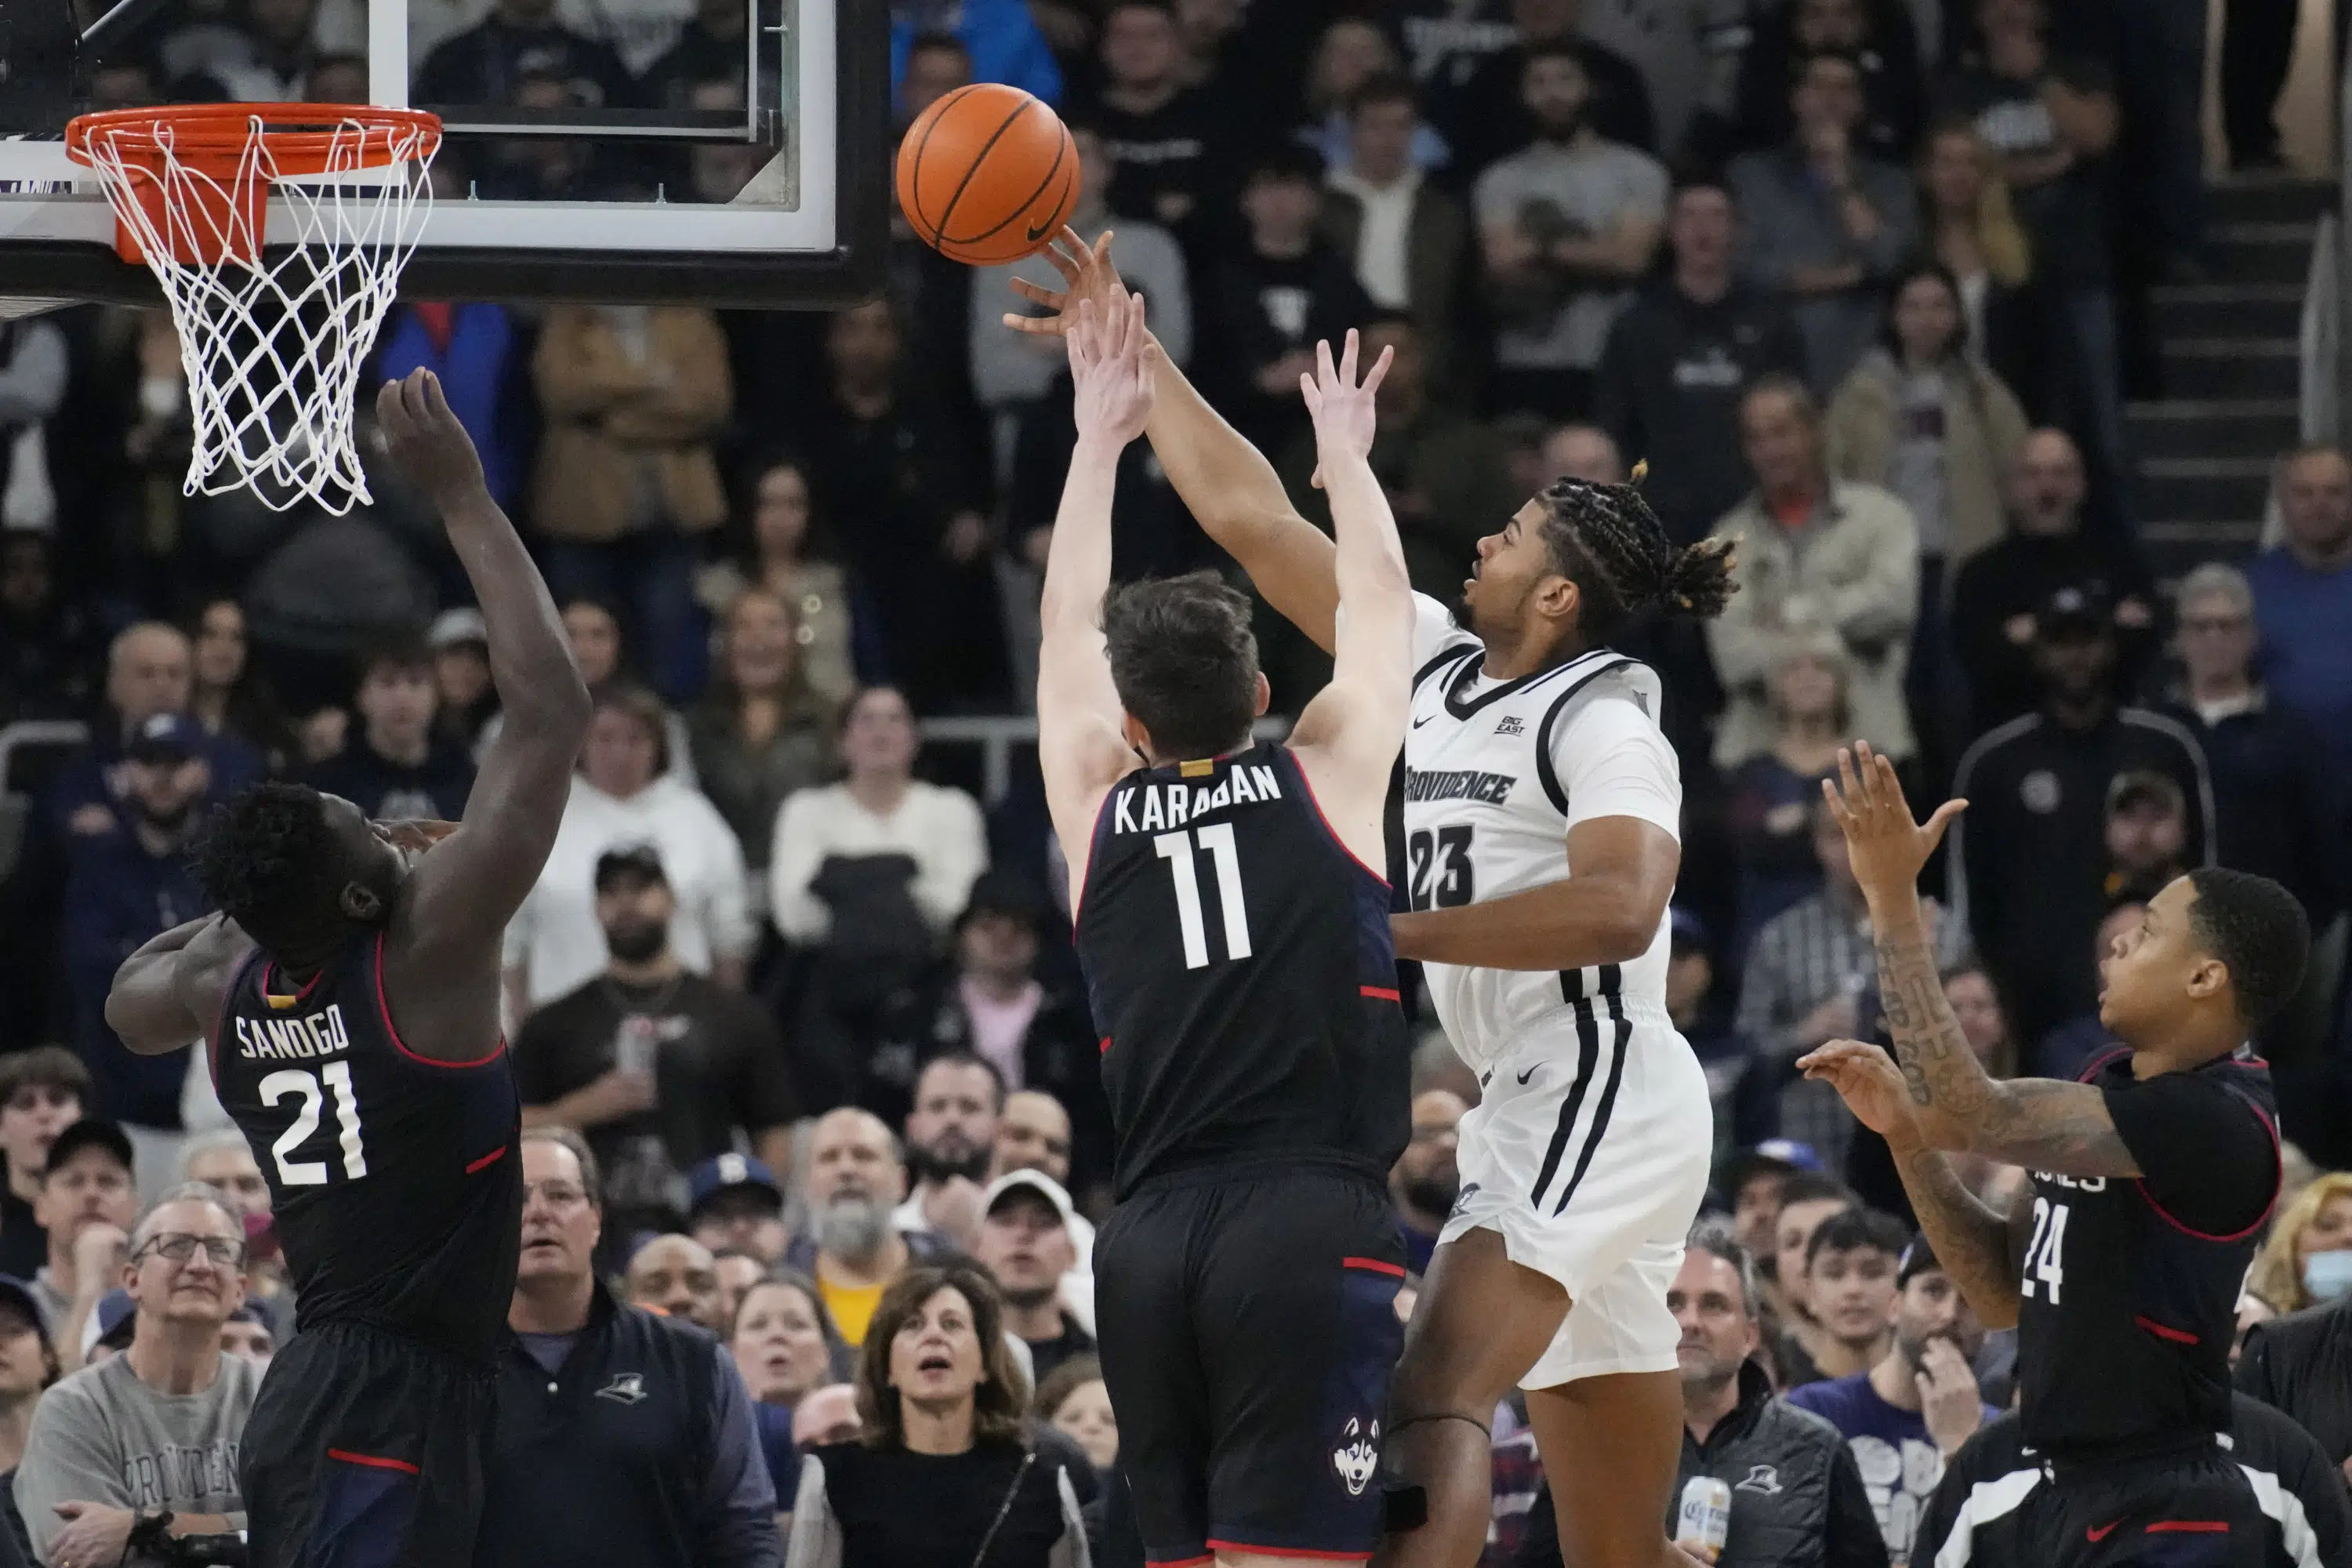 Hopkins scores 27 to help Providence beat No. 4 UConn 73-61